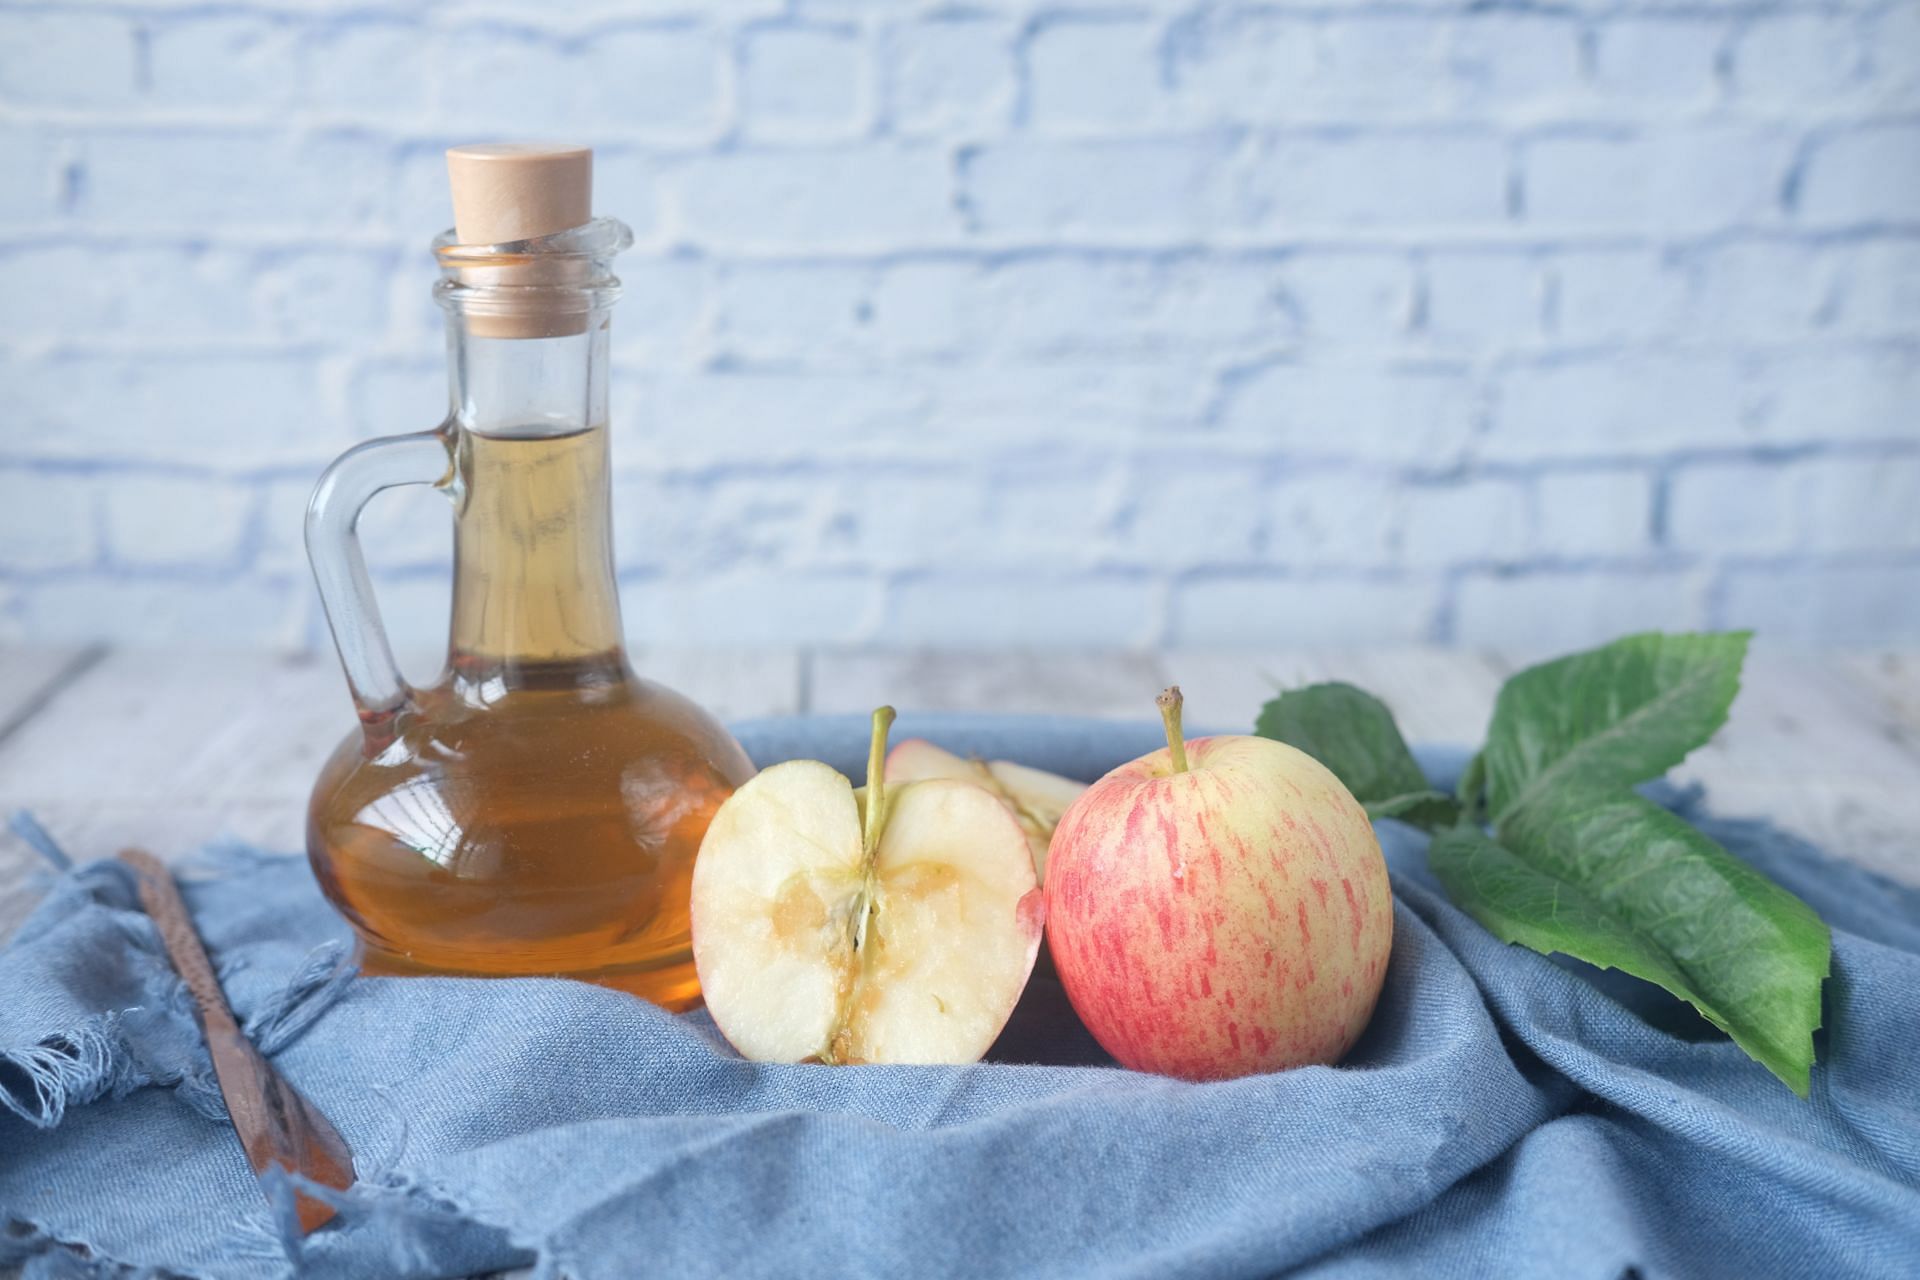 Apple cider is one of the most effective home remedies for ear infection out there! (Image via unsplash/Towfiqu Barbhuiya)